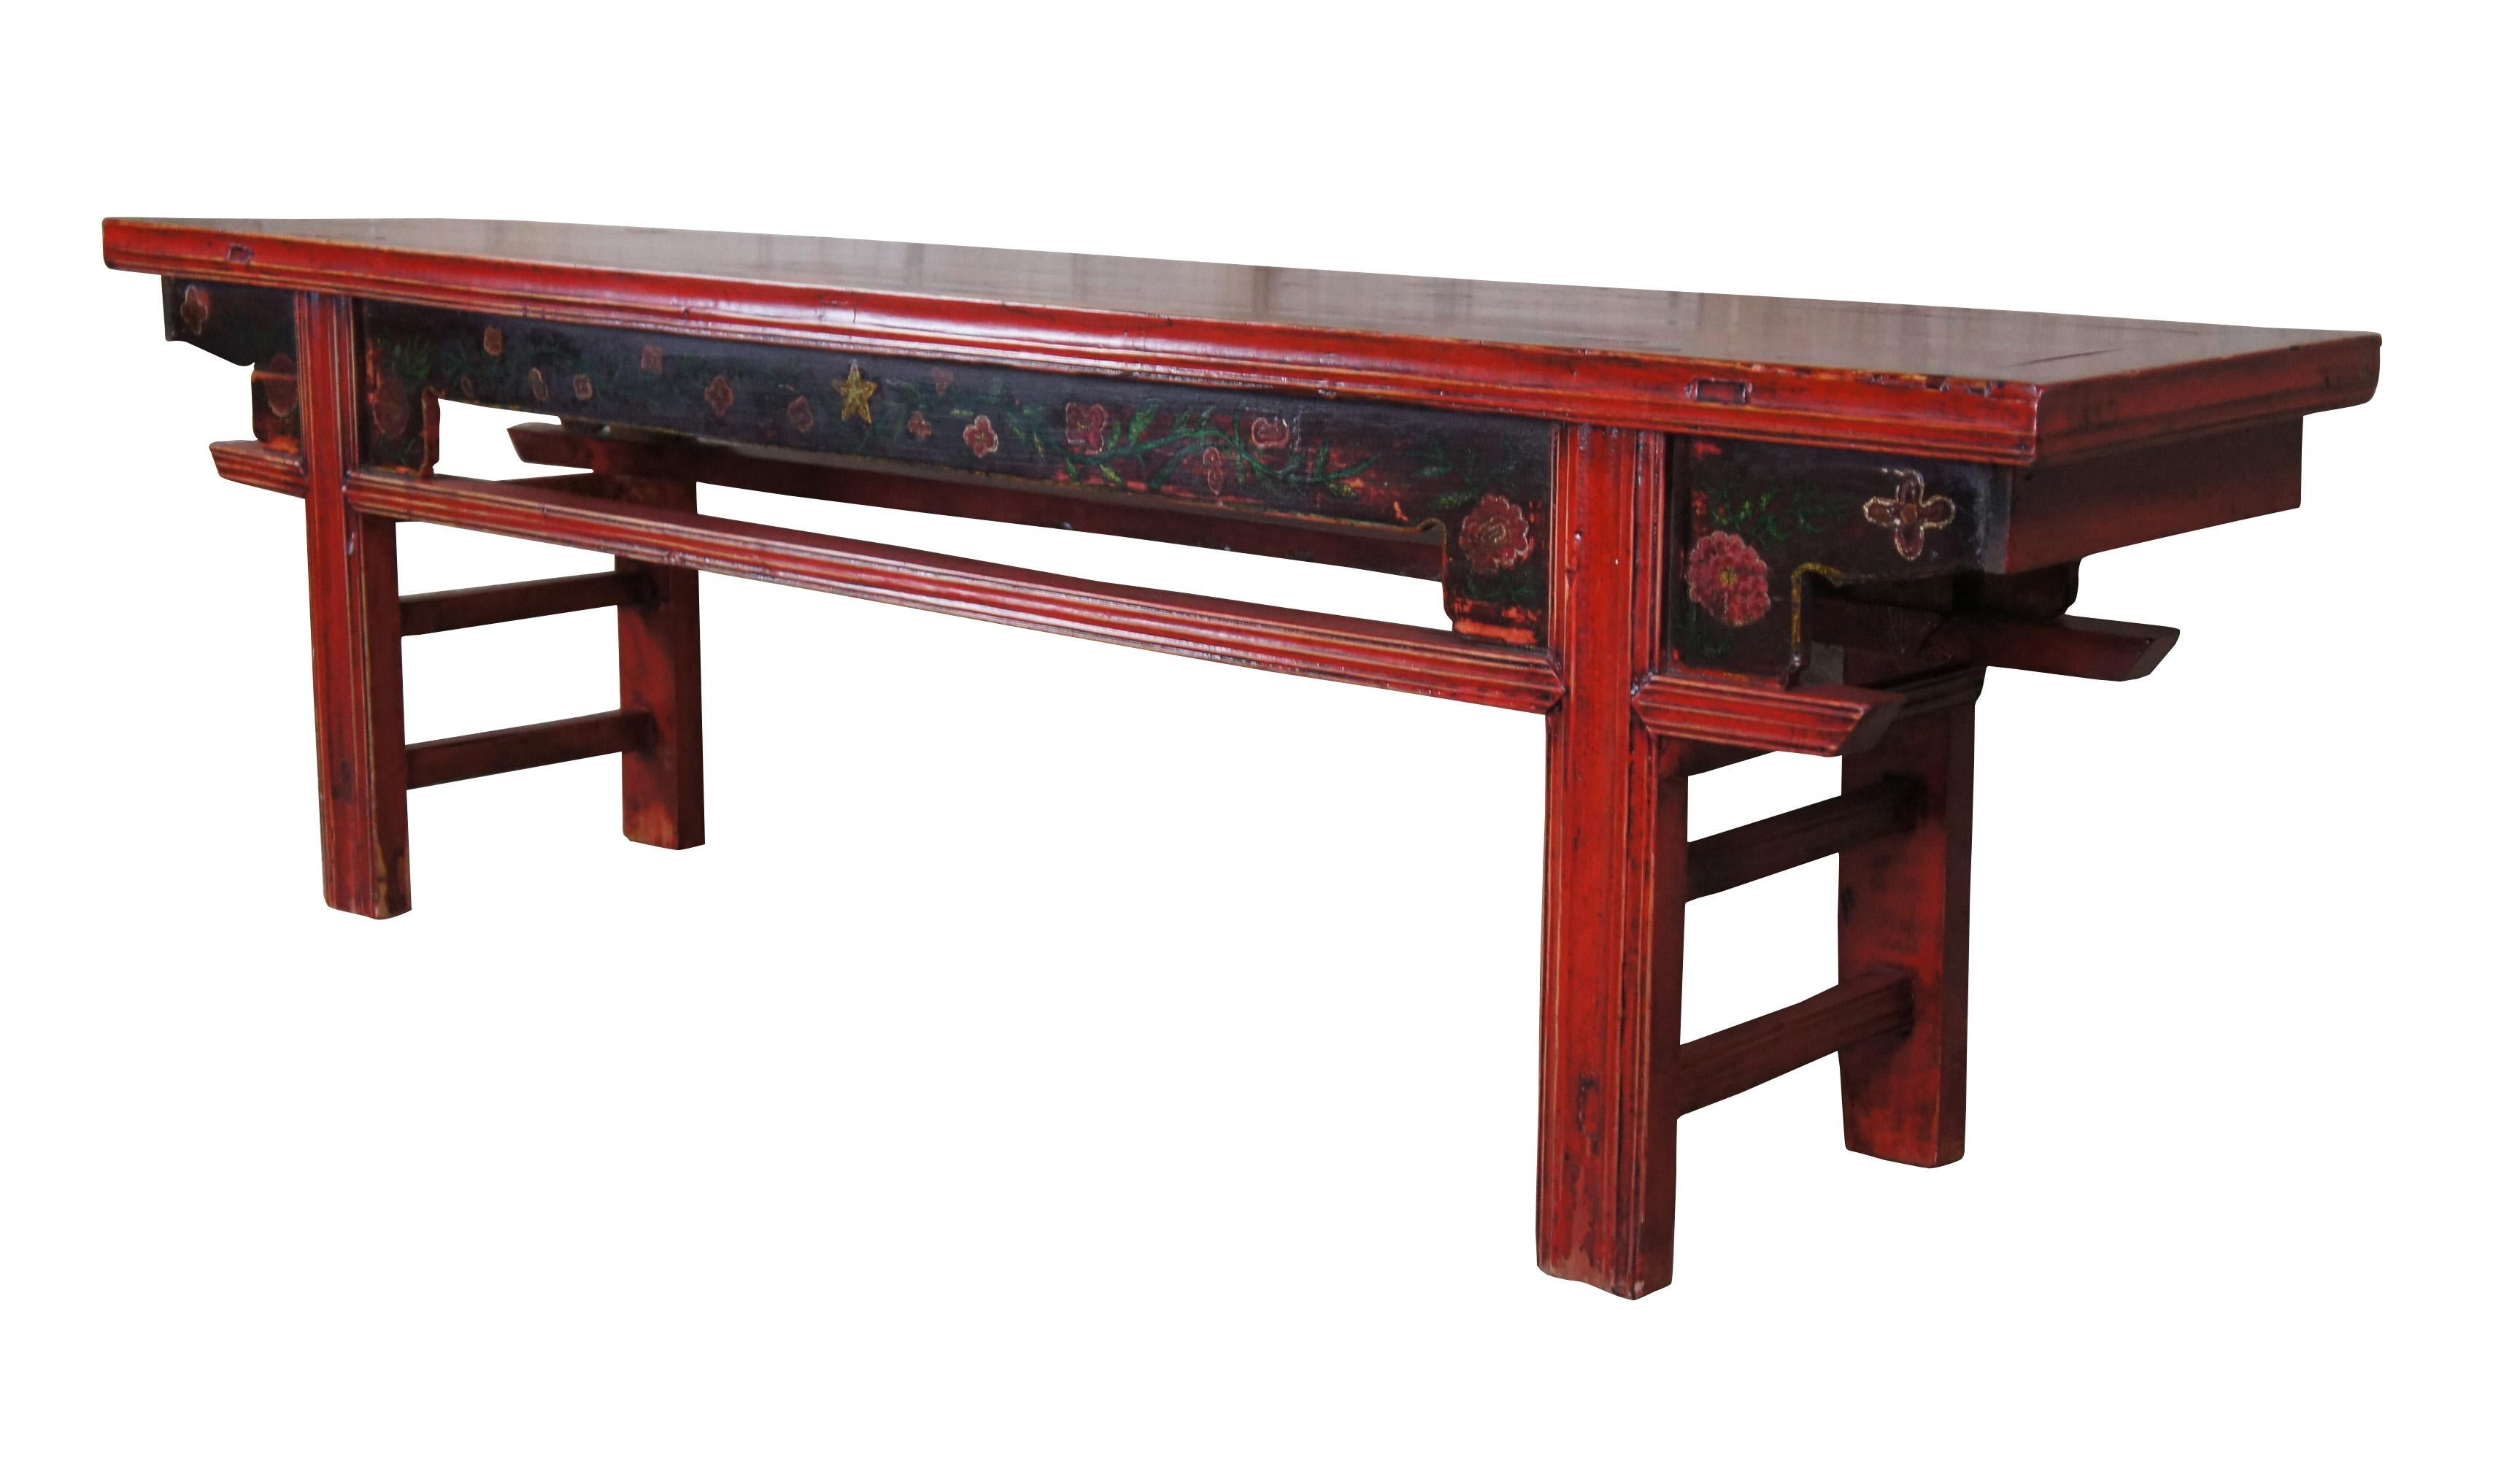 20th Century vintage Chinese chinoiserie hallway bench or pew. Made from Elm featuring rectangular form with red lacquer finish and folk painted floral and star motif. Constructed via mortise and tenon joinery.